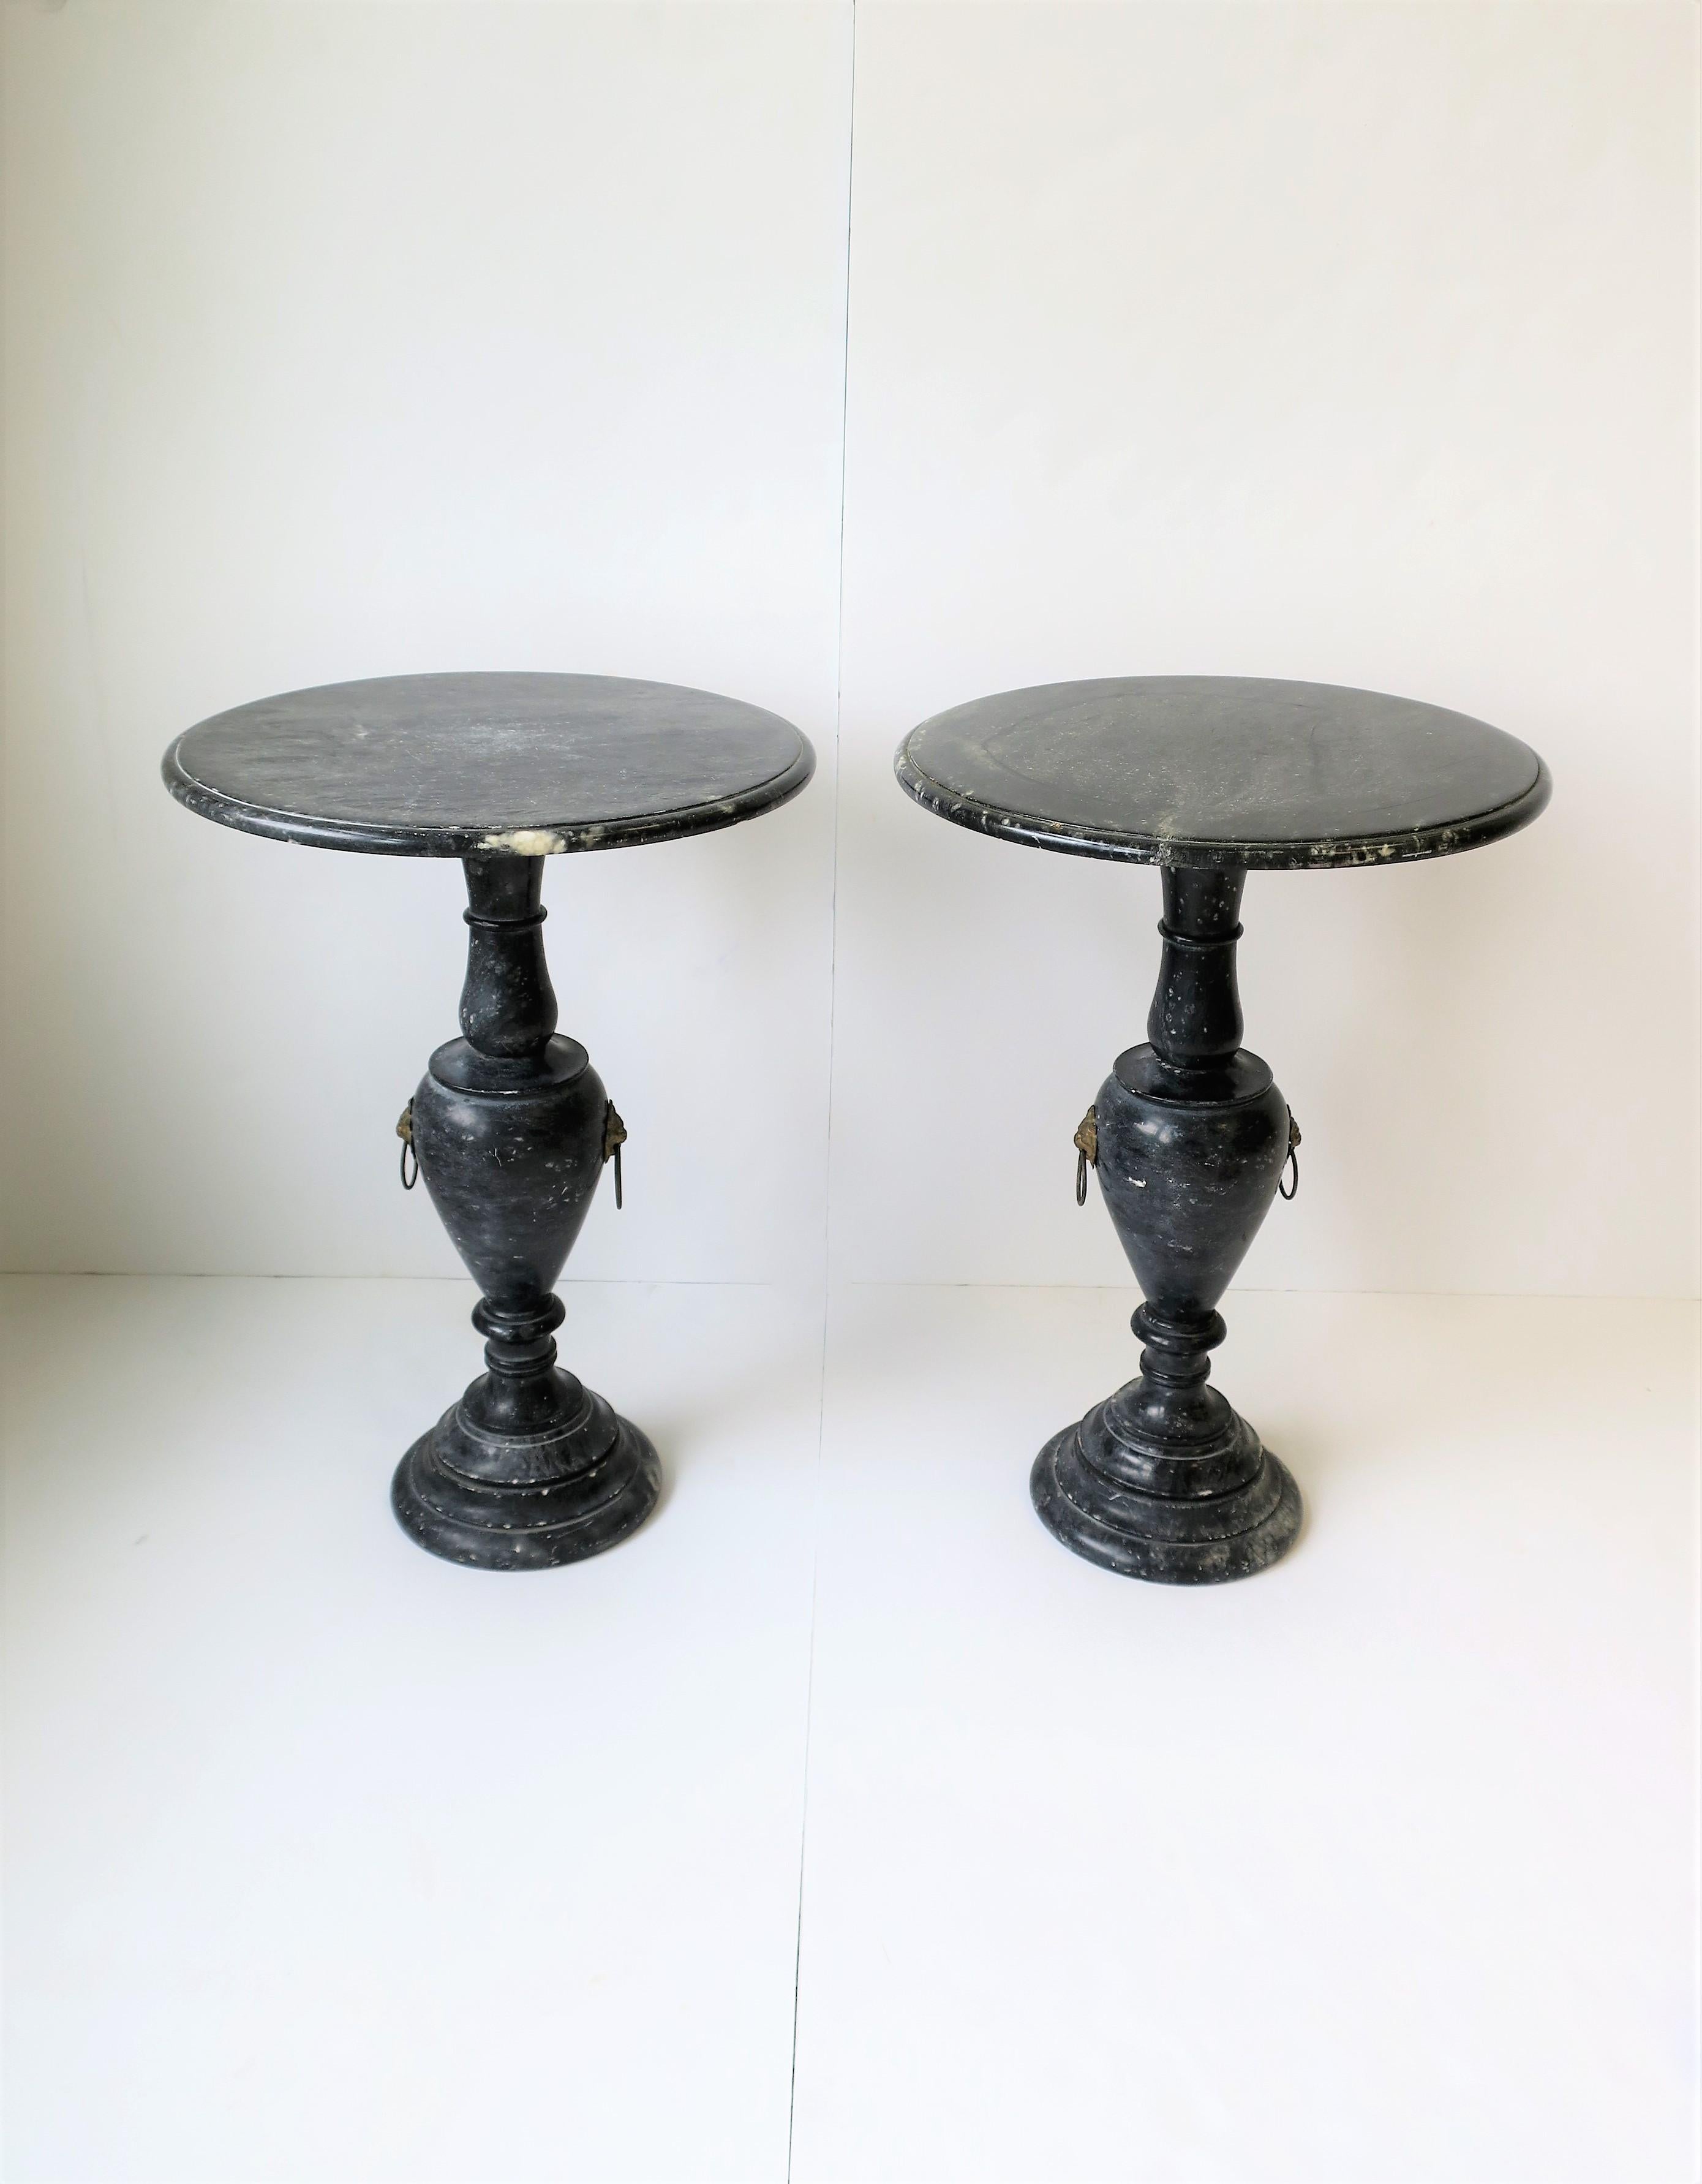 Polished Italian Black and White Marble Round Side Table